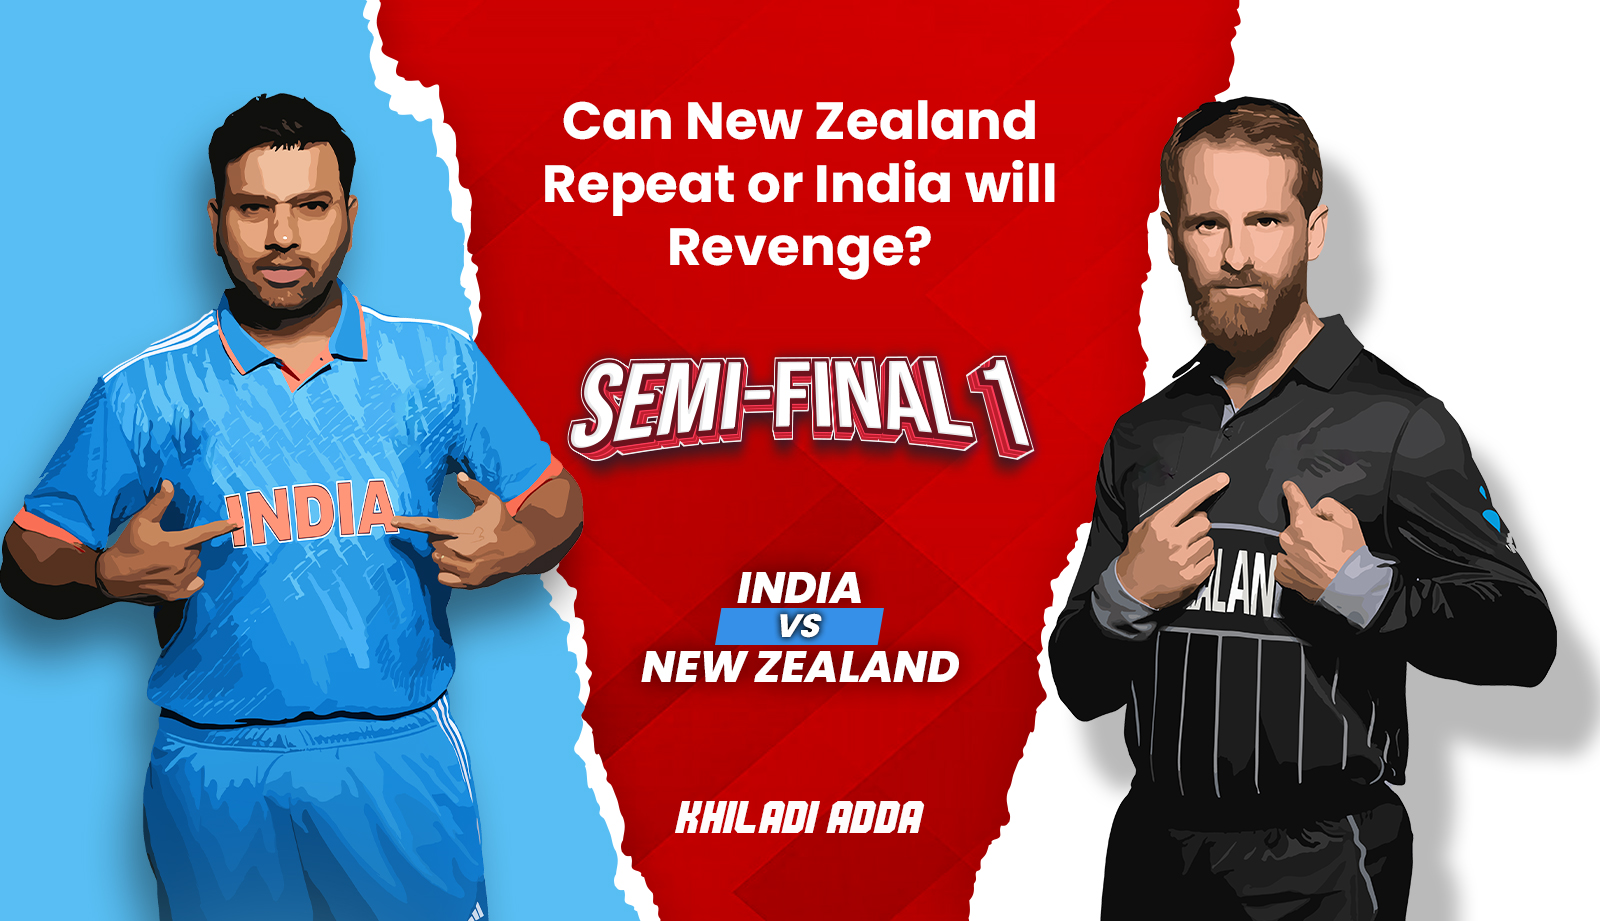 Can New Zealand Repeat or India will Revenge?